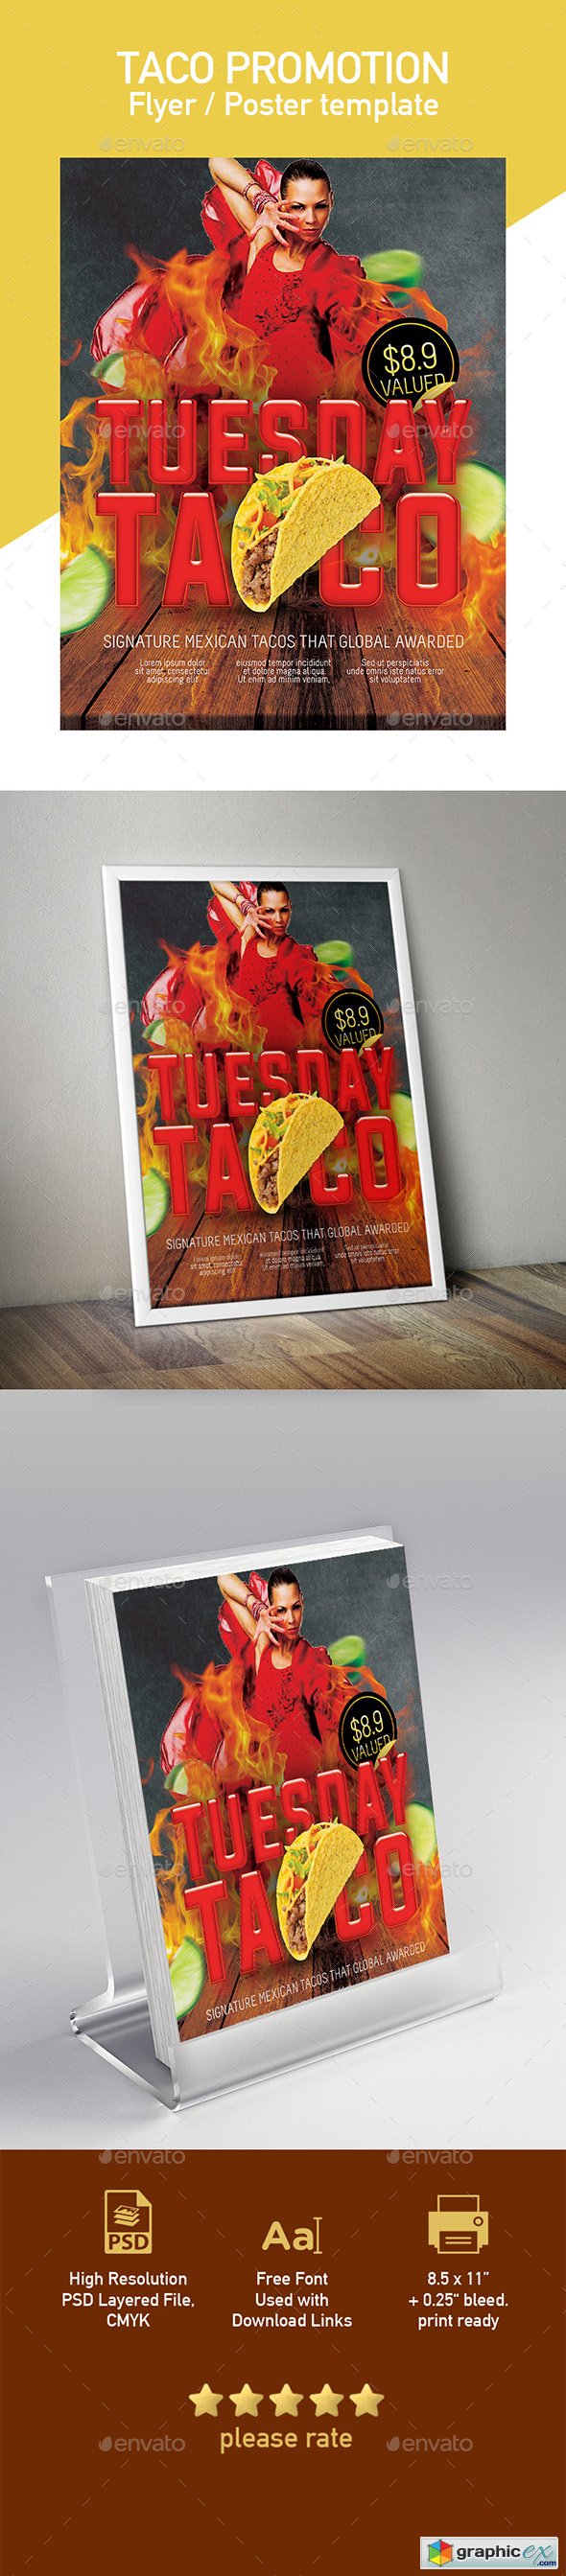 Tuesday Tacos Flyer Poster Template